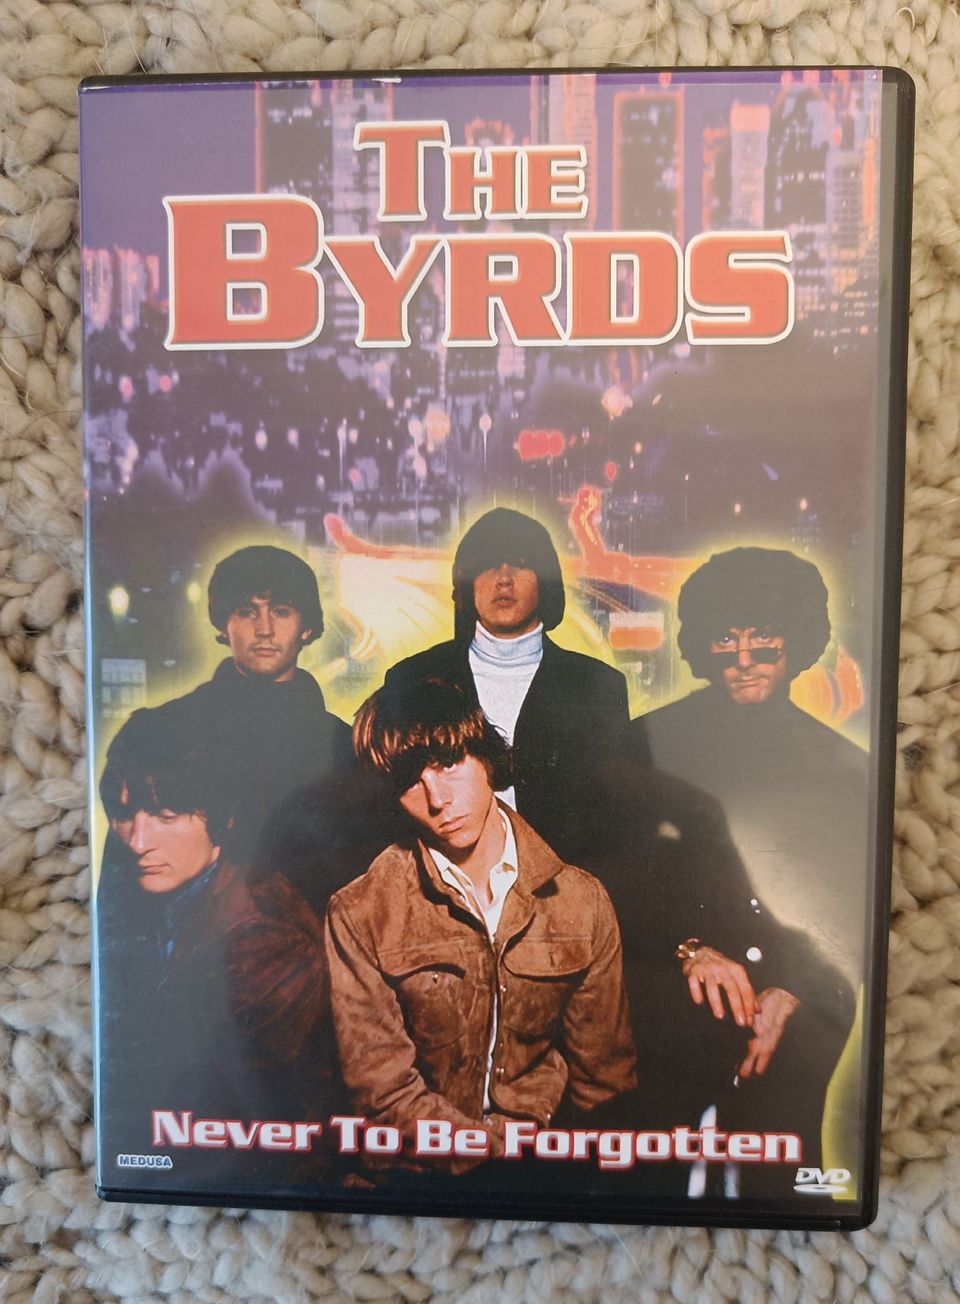 The Byrds: Never to be Forgotten DVD